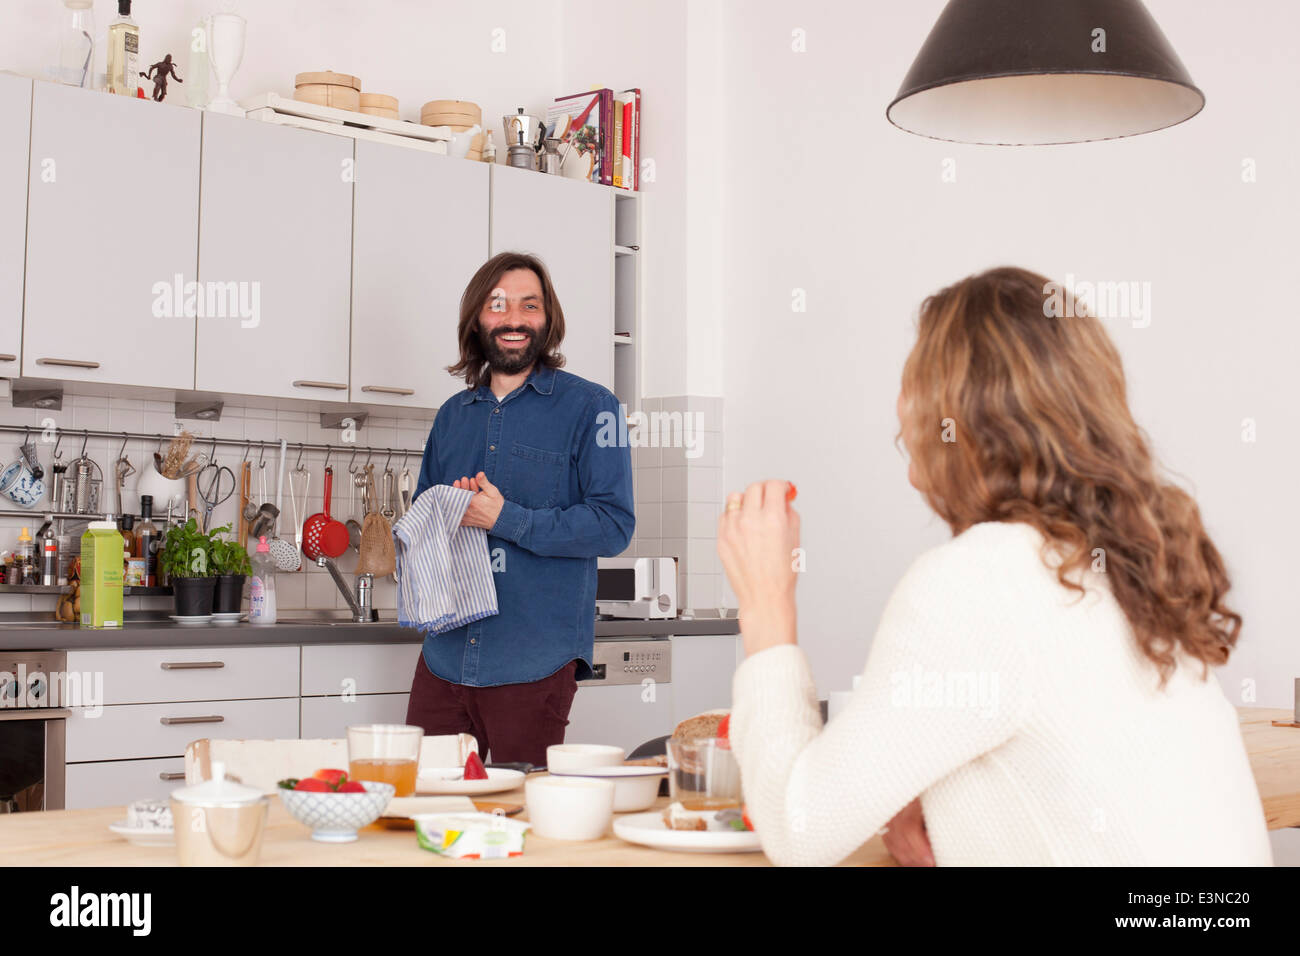 Smiling mid adult couple in kitchen Stock Photo